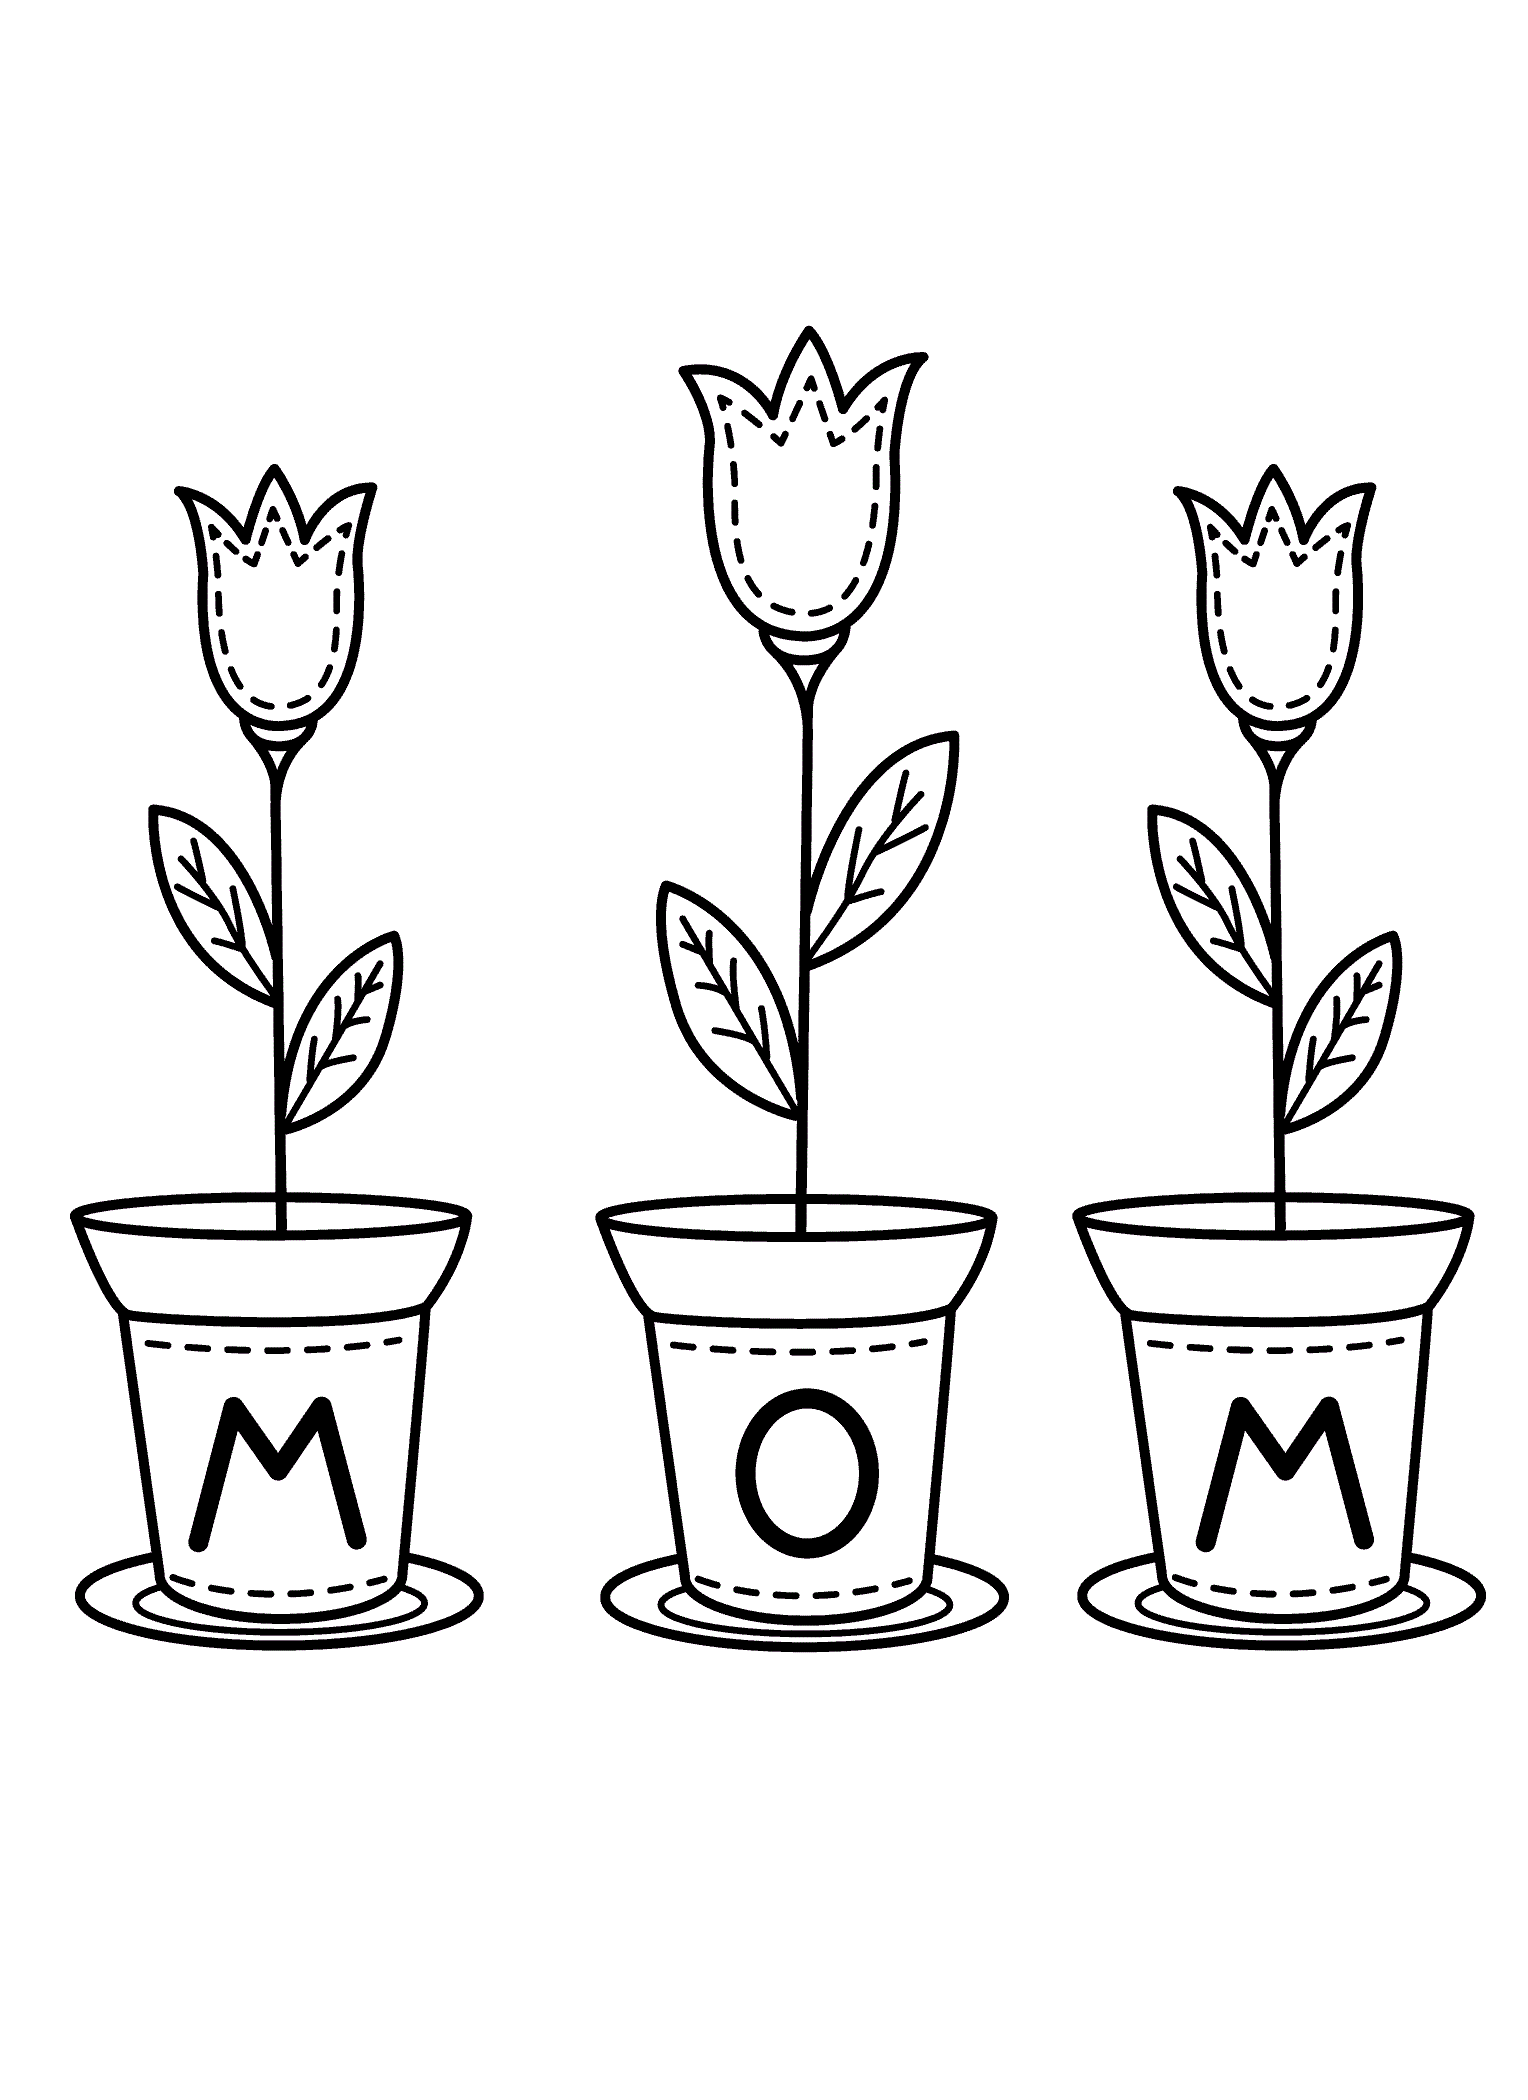 mom coloring pages to print